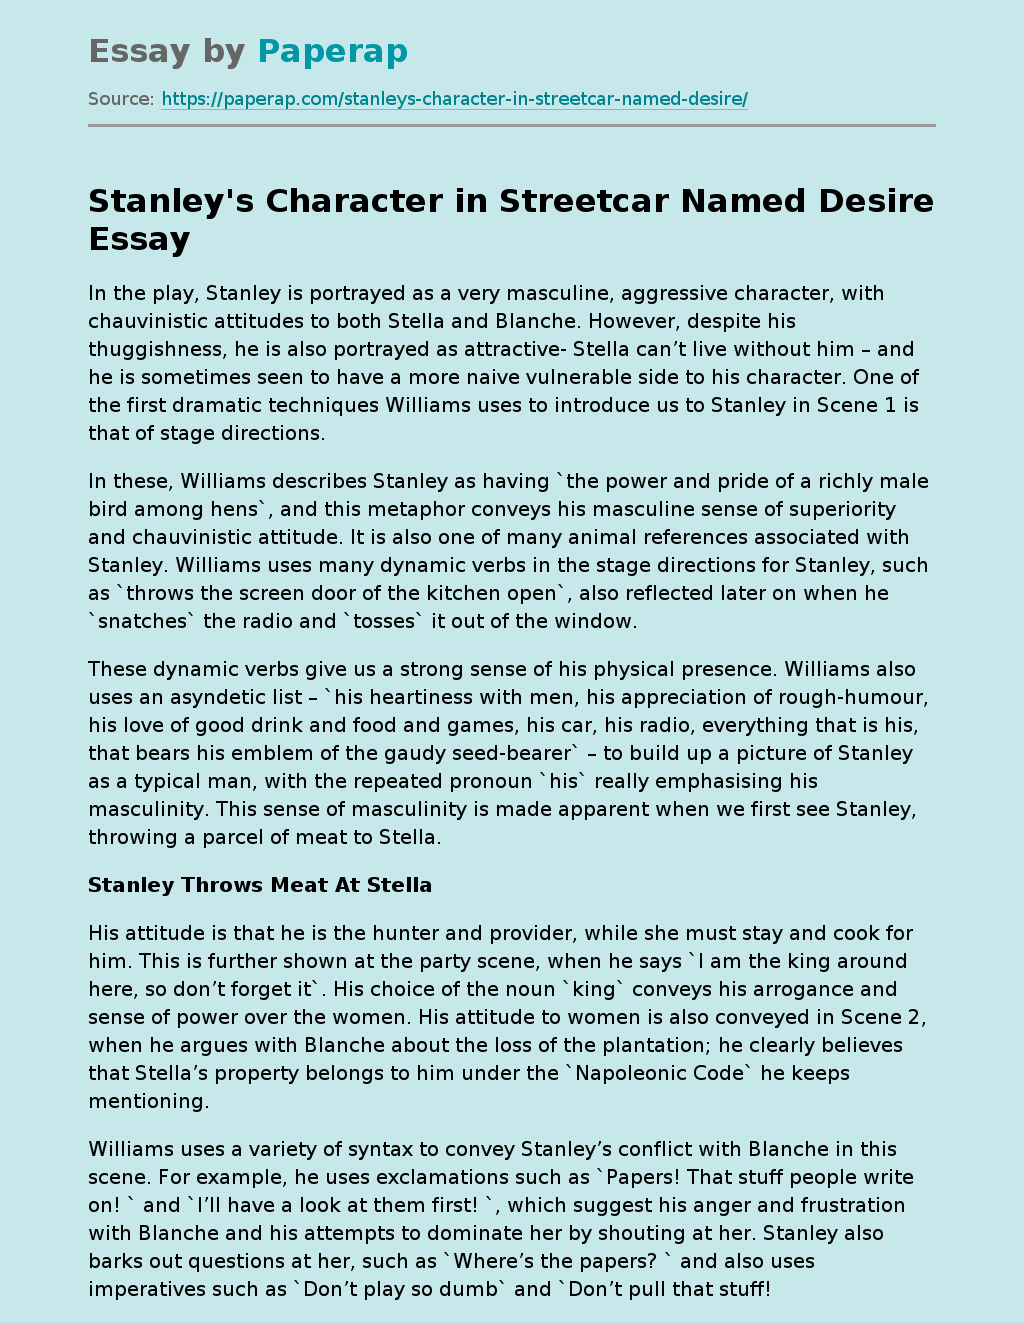 Stanley's Character in Streetcar Named Desire